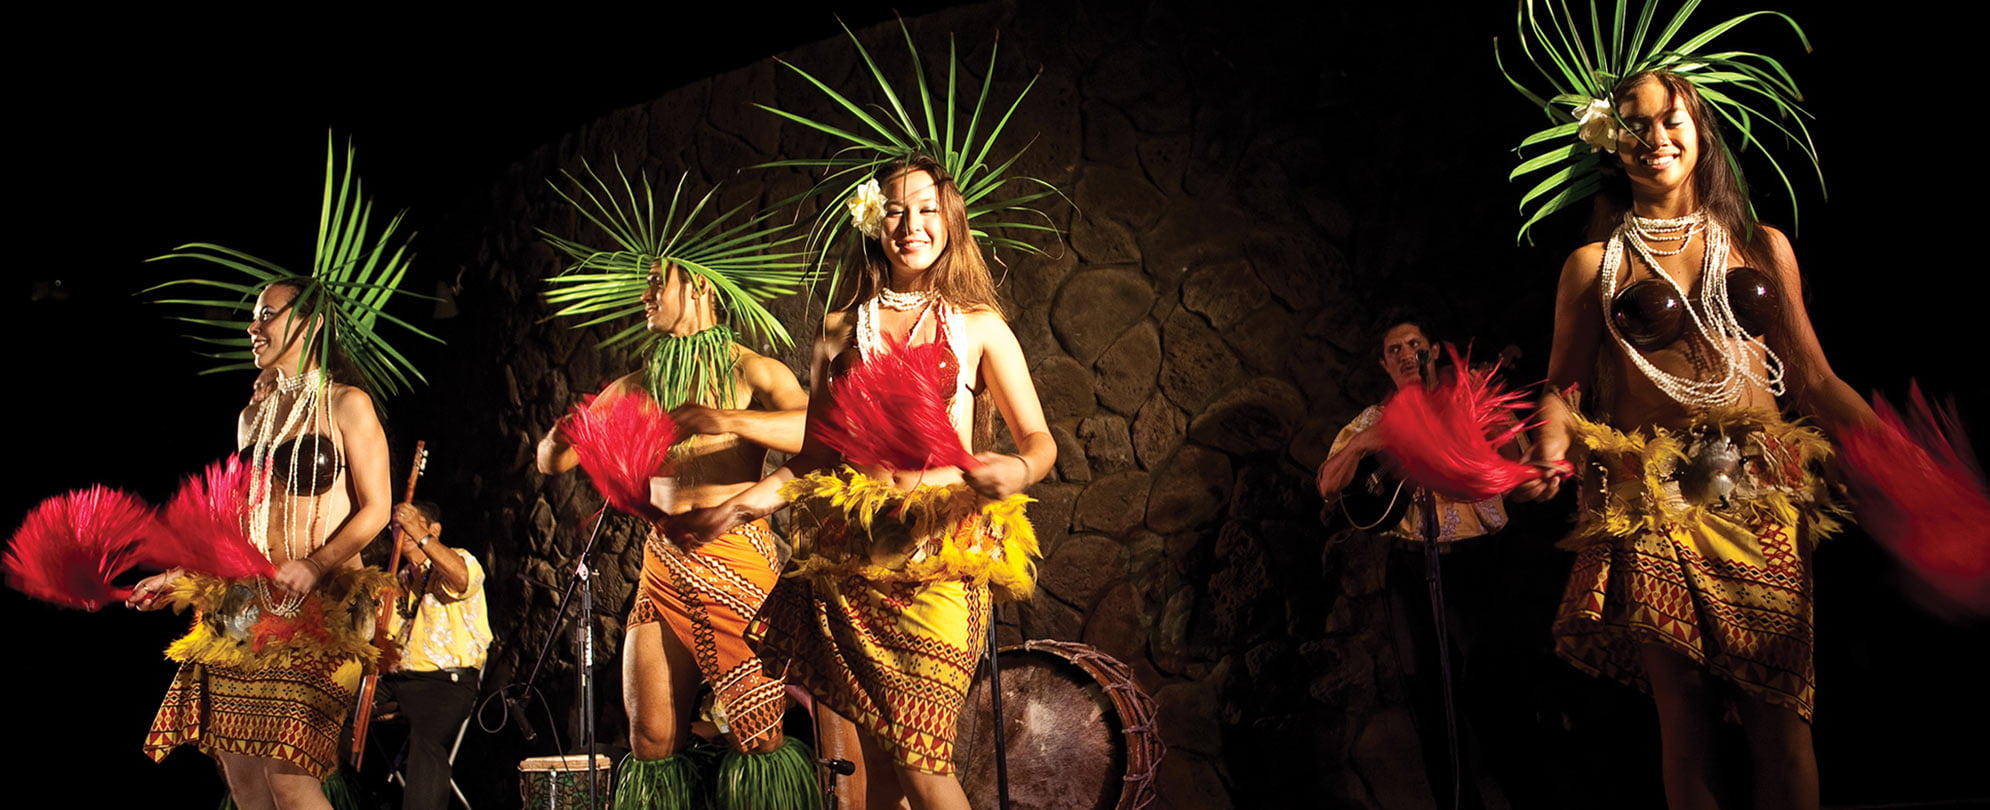 Luau performers wearing palm headdresses, coconut shells, and skirts. 